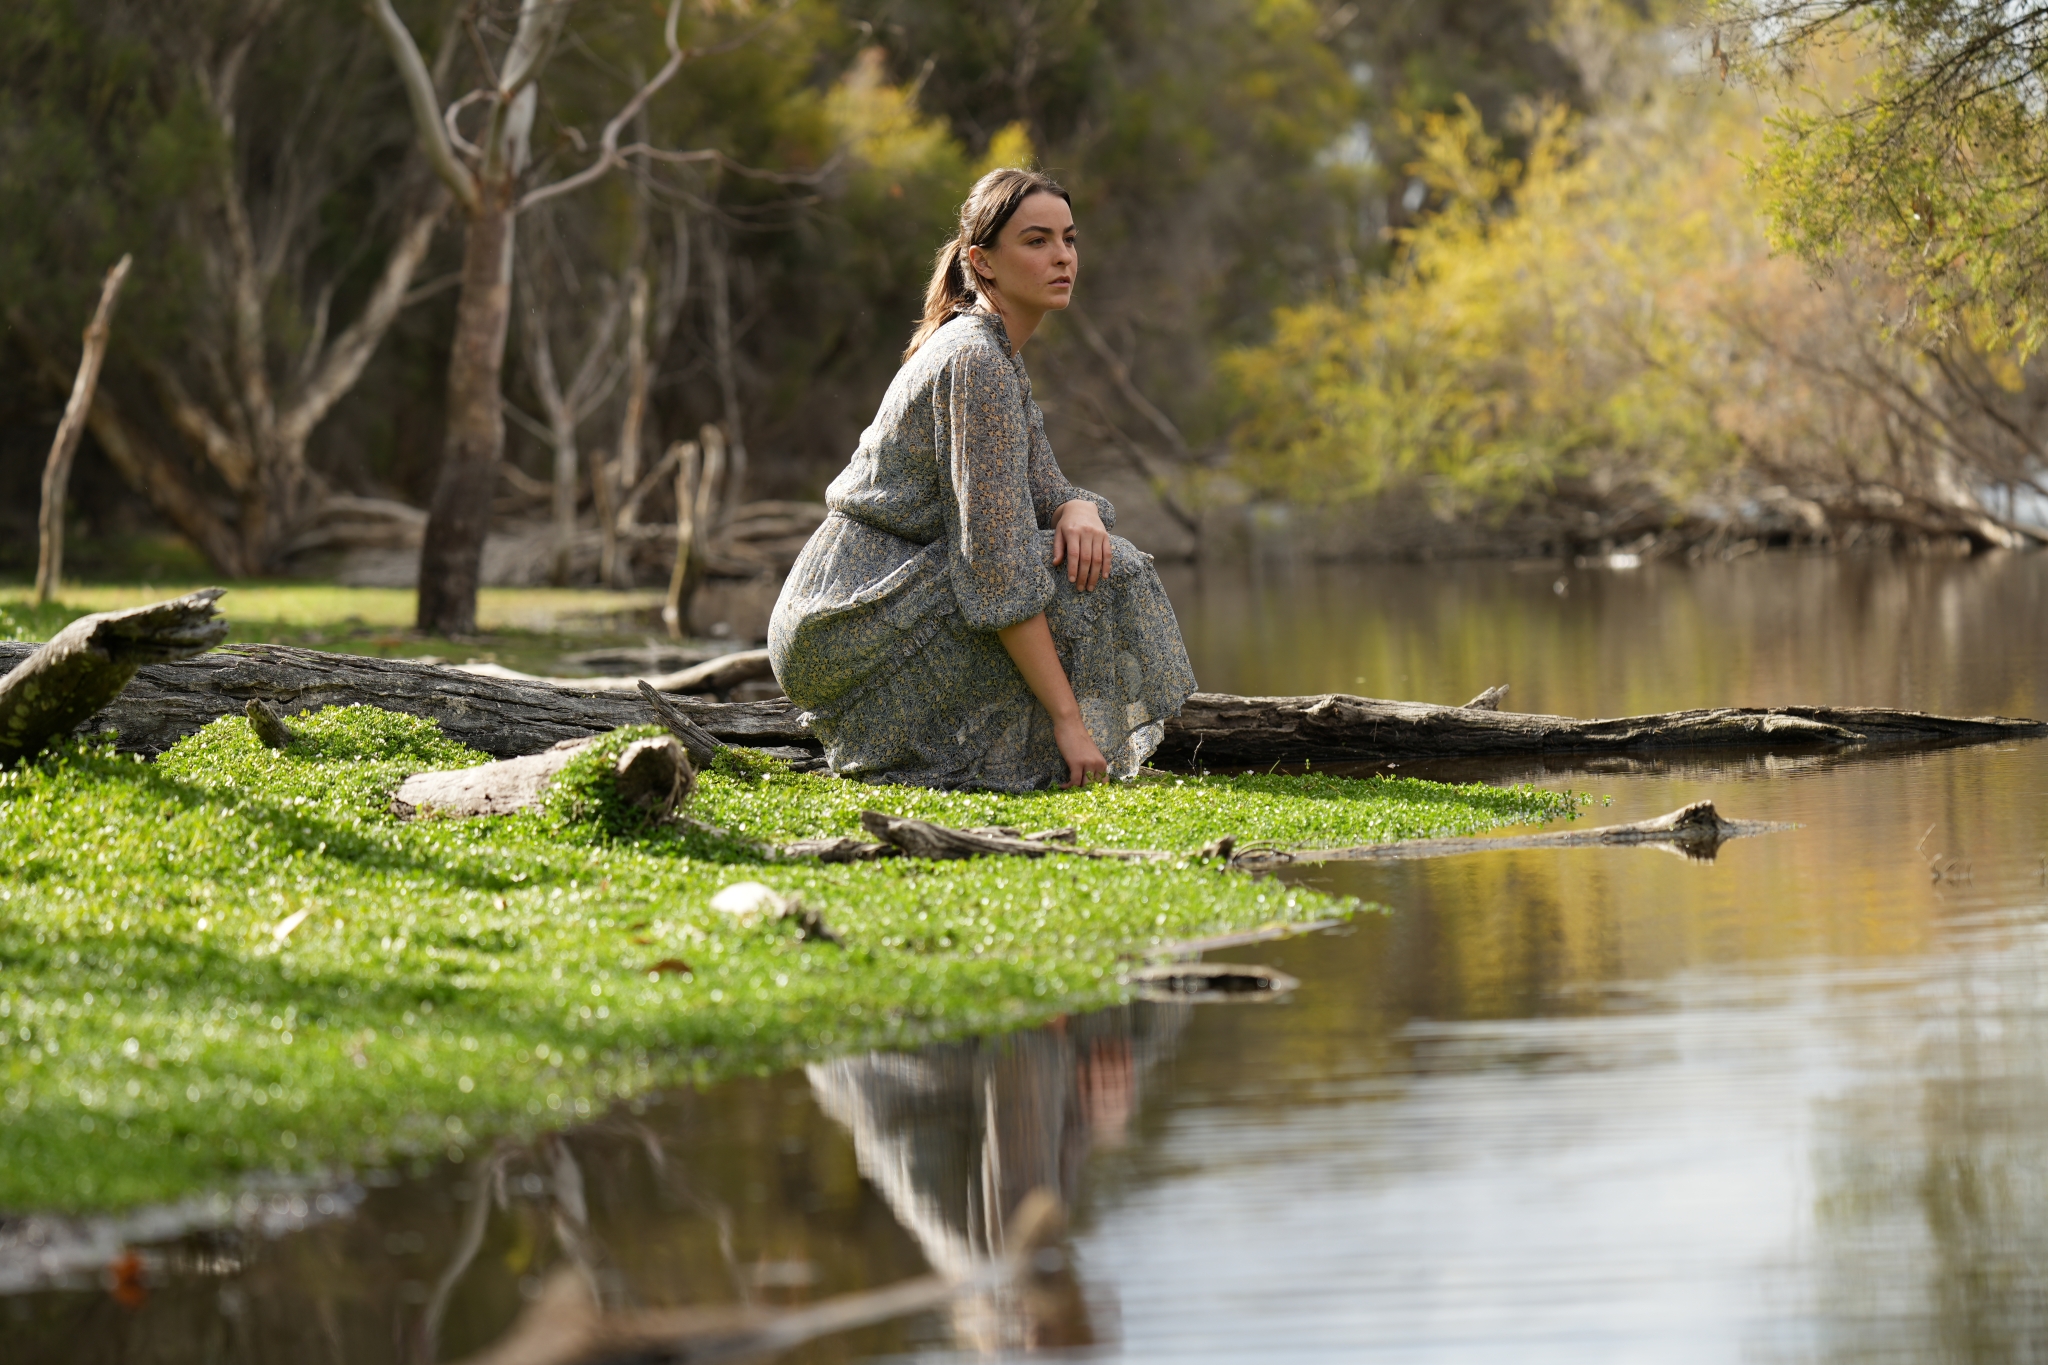 Female model sat on a grassy riverbank in a forest